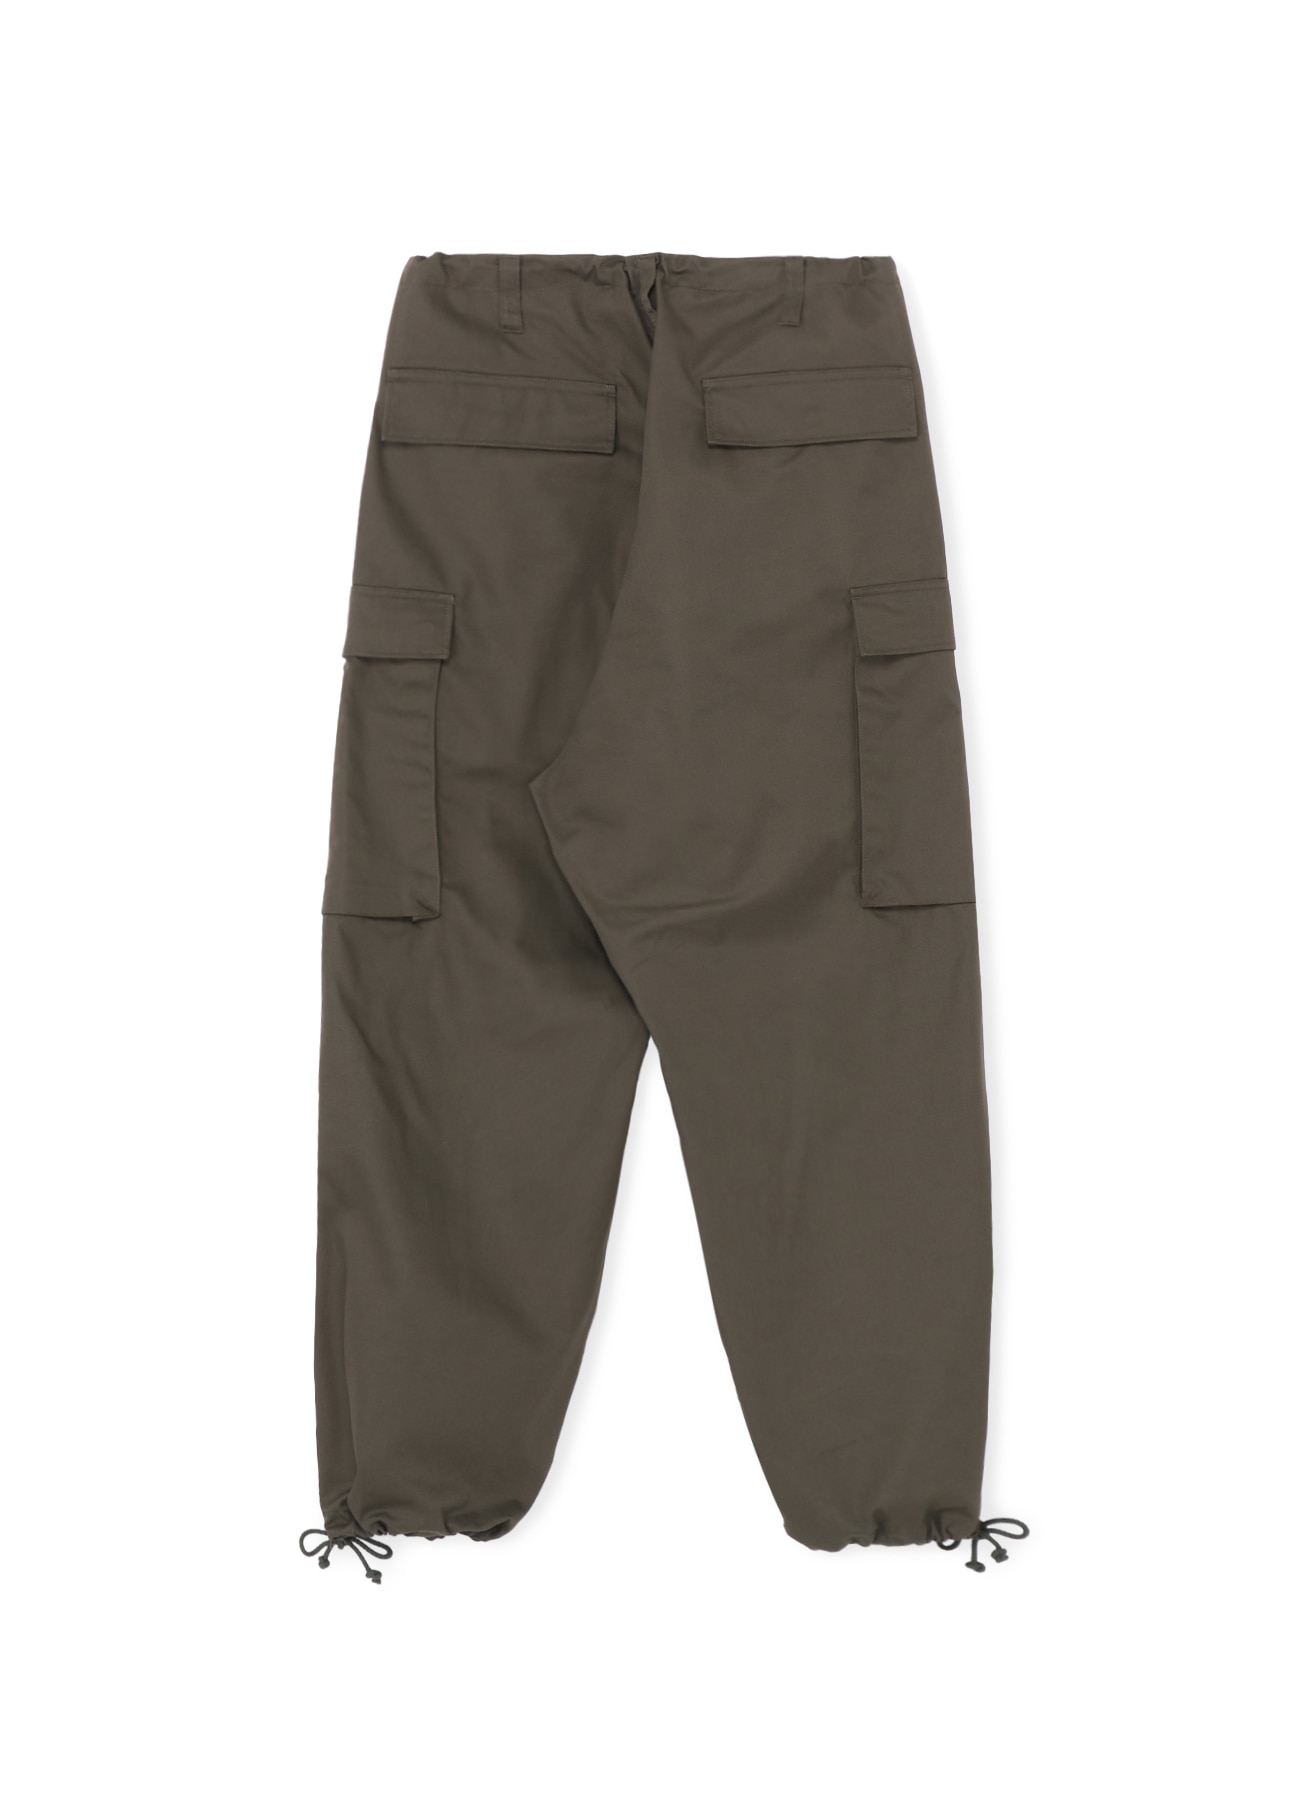 DNC Polyester Cotton 3 In 1 Pants (1503)